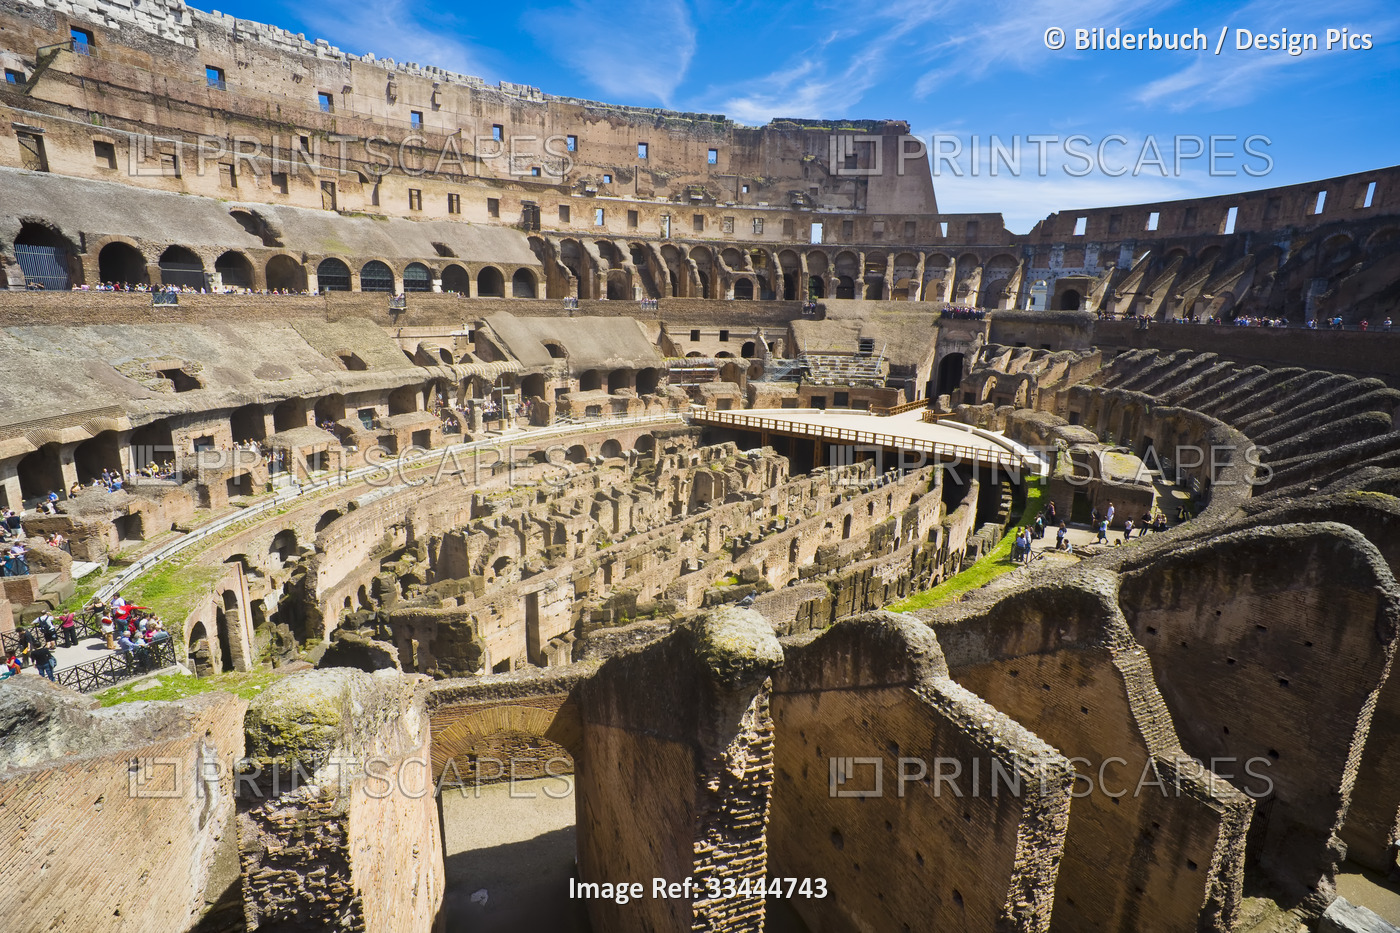 Overview of the interior of the iconic Colosseum against a blue sky with crowds ...